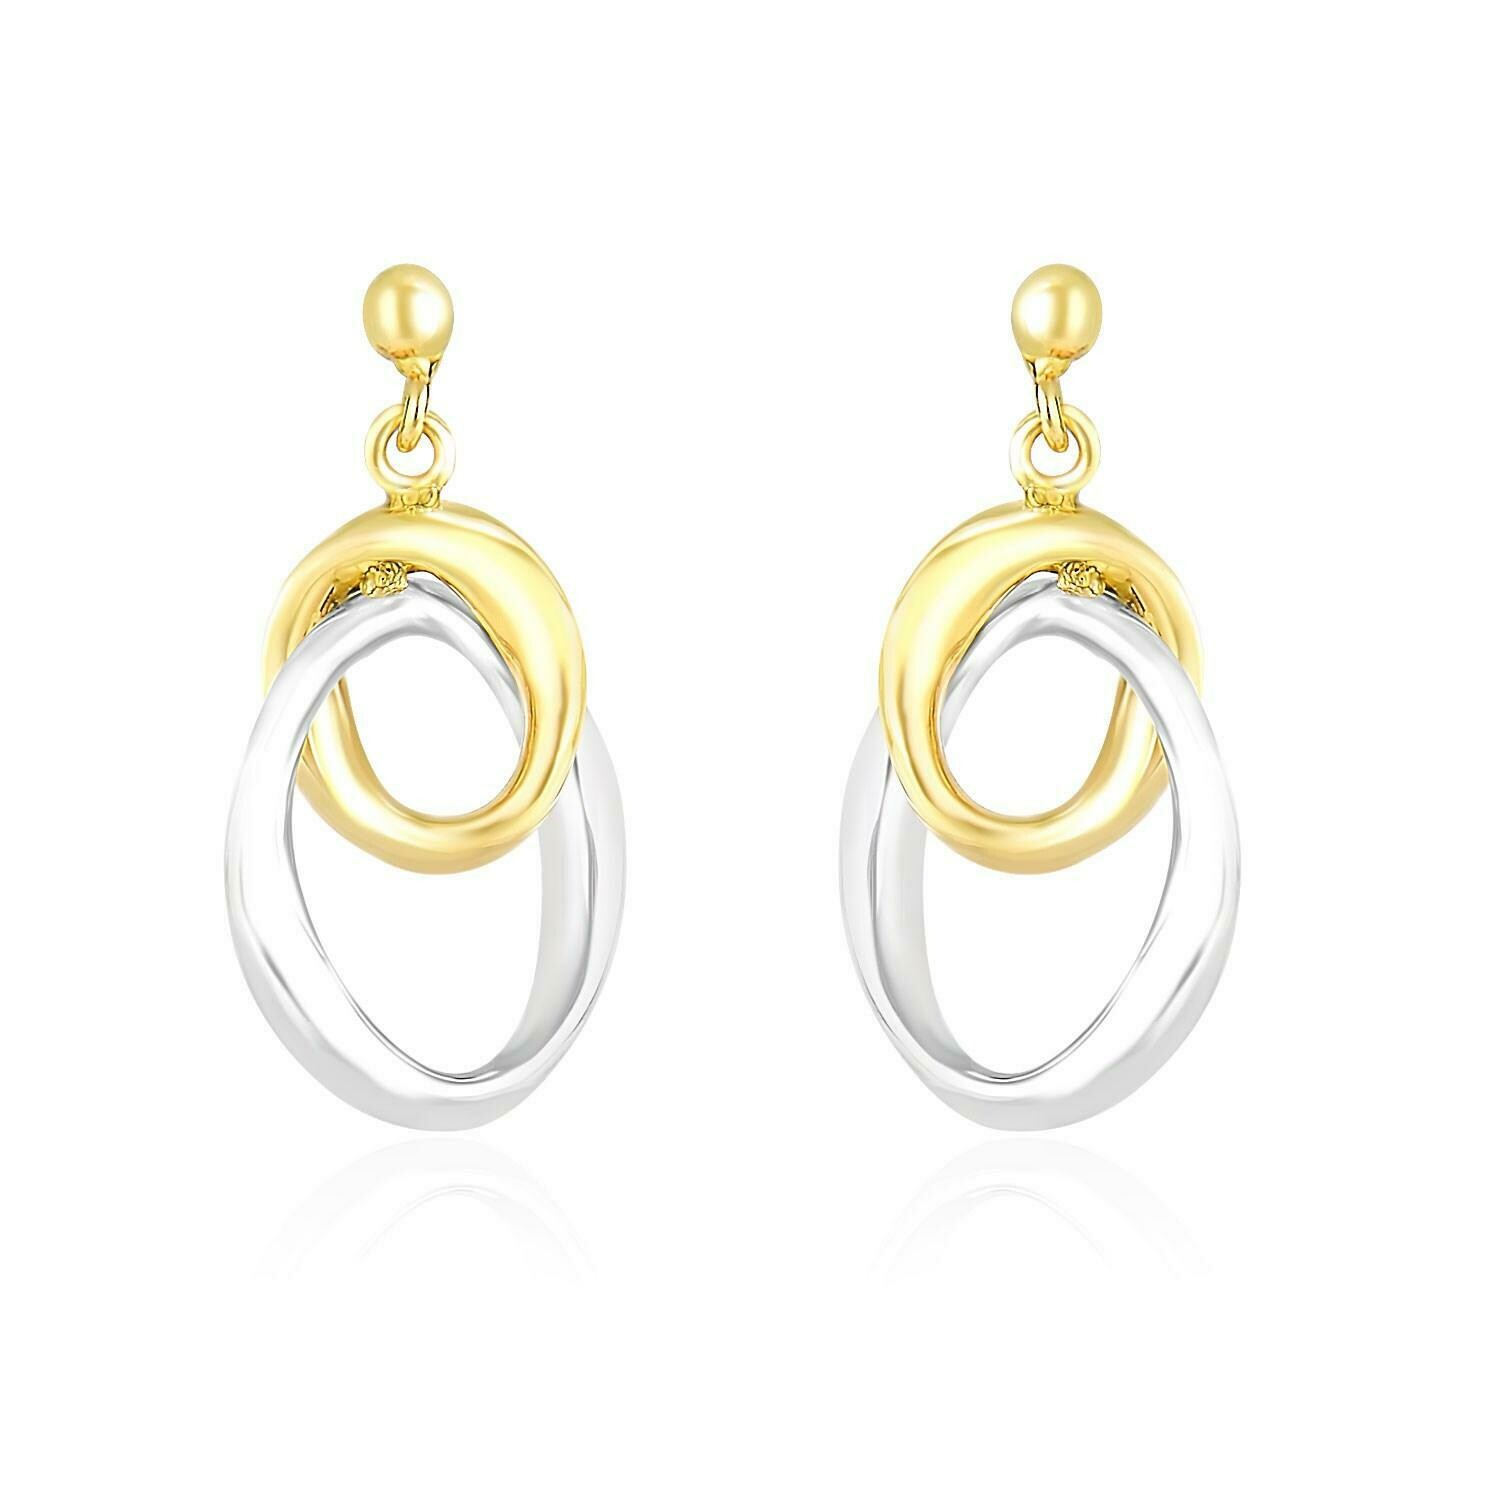 14k Two-Tone Gold Drop Earrings with Interlaced Oval Sections